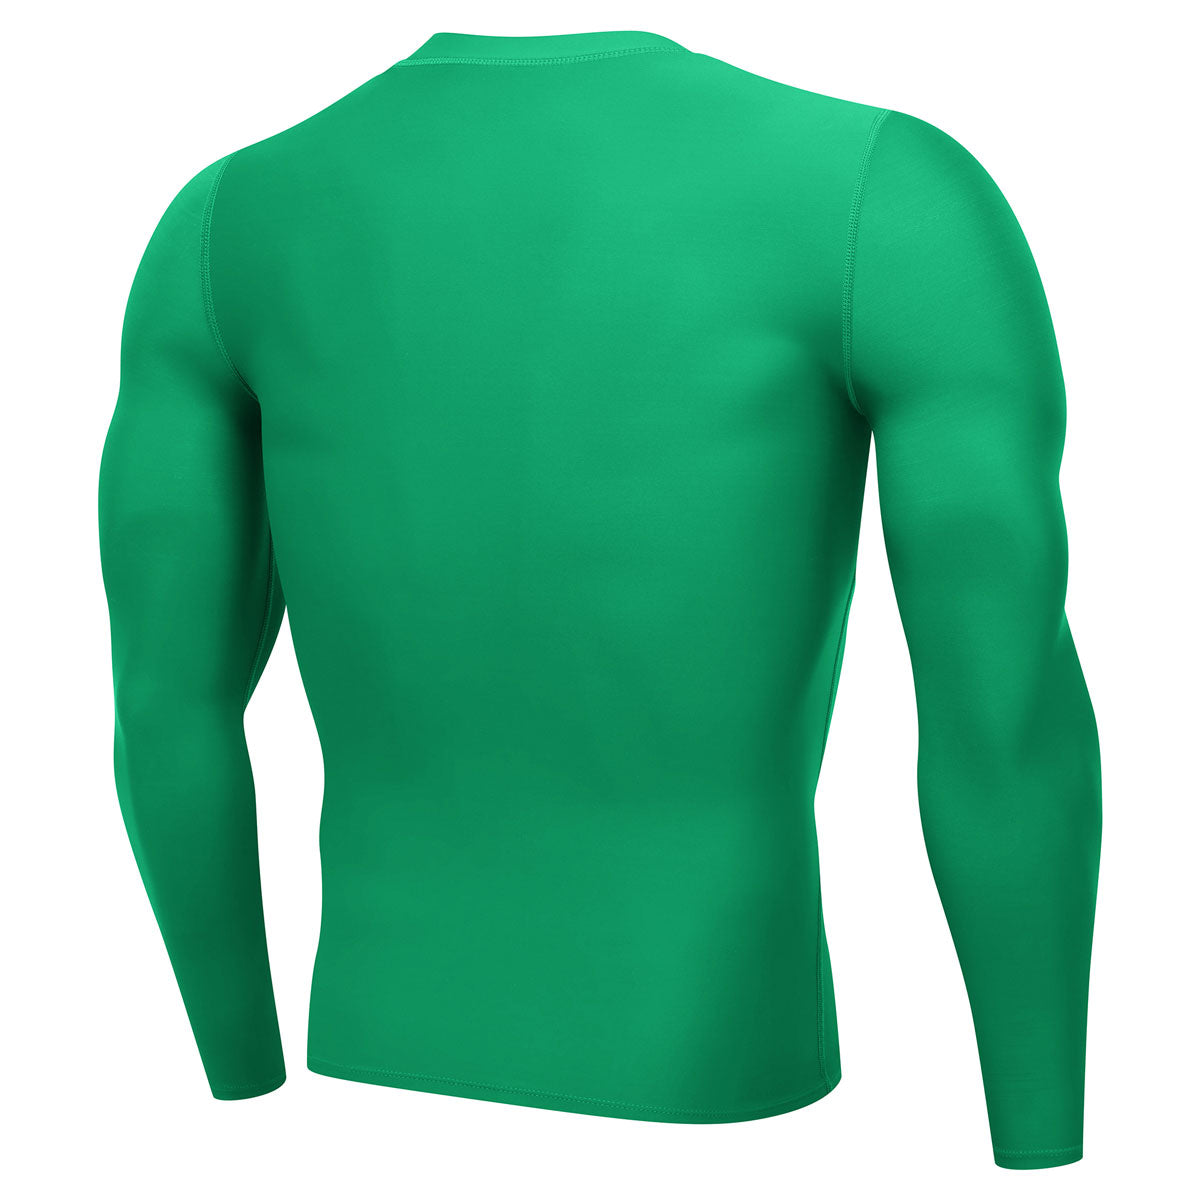 Atak Compression Recovery Long Sleeve Top - Youth - Green